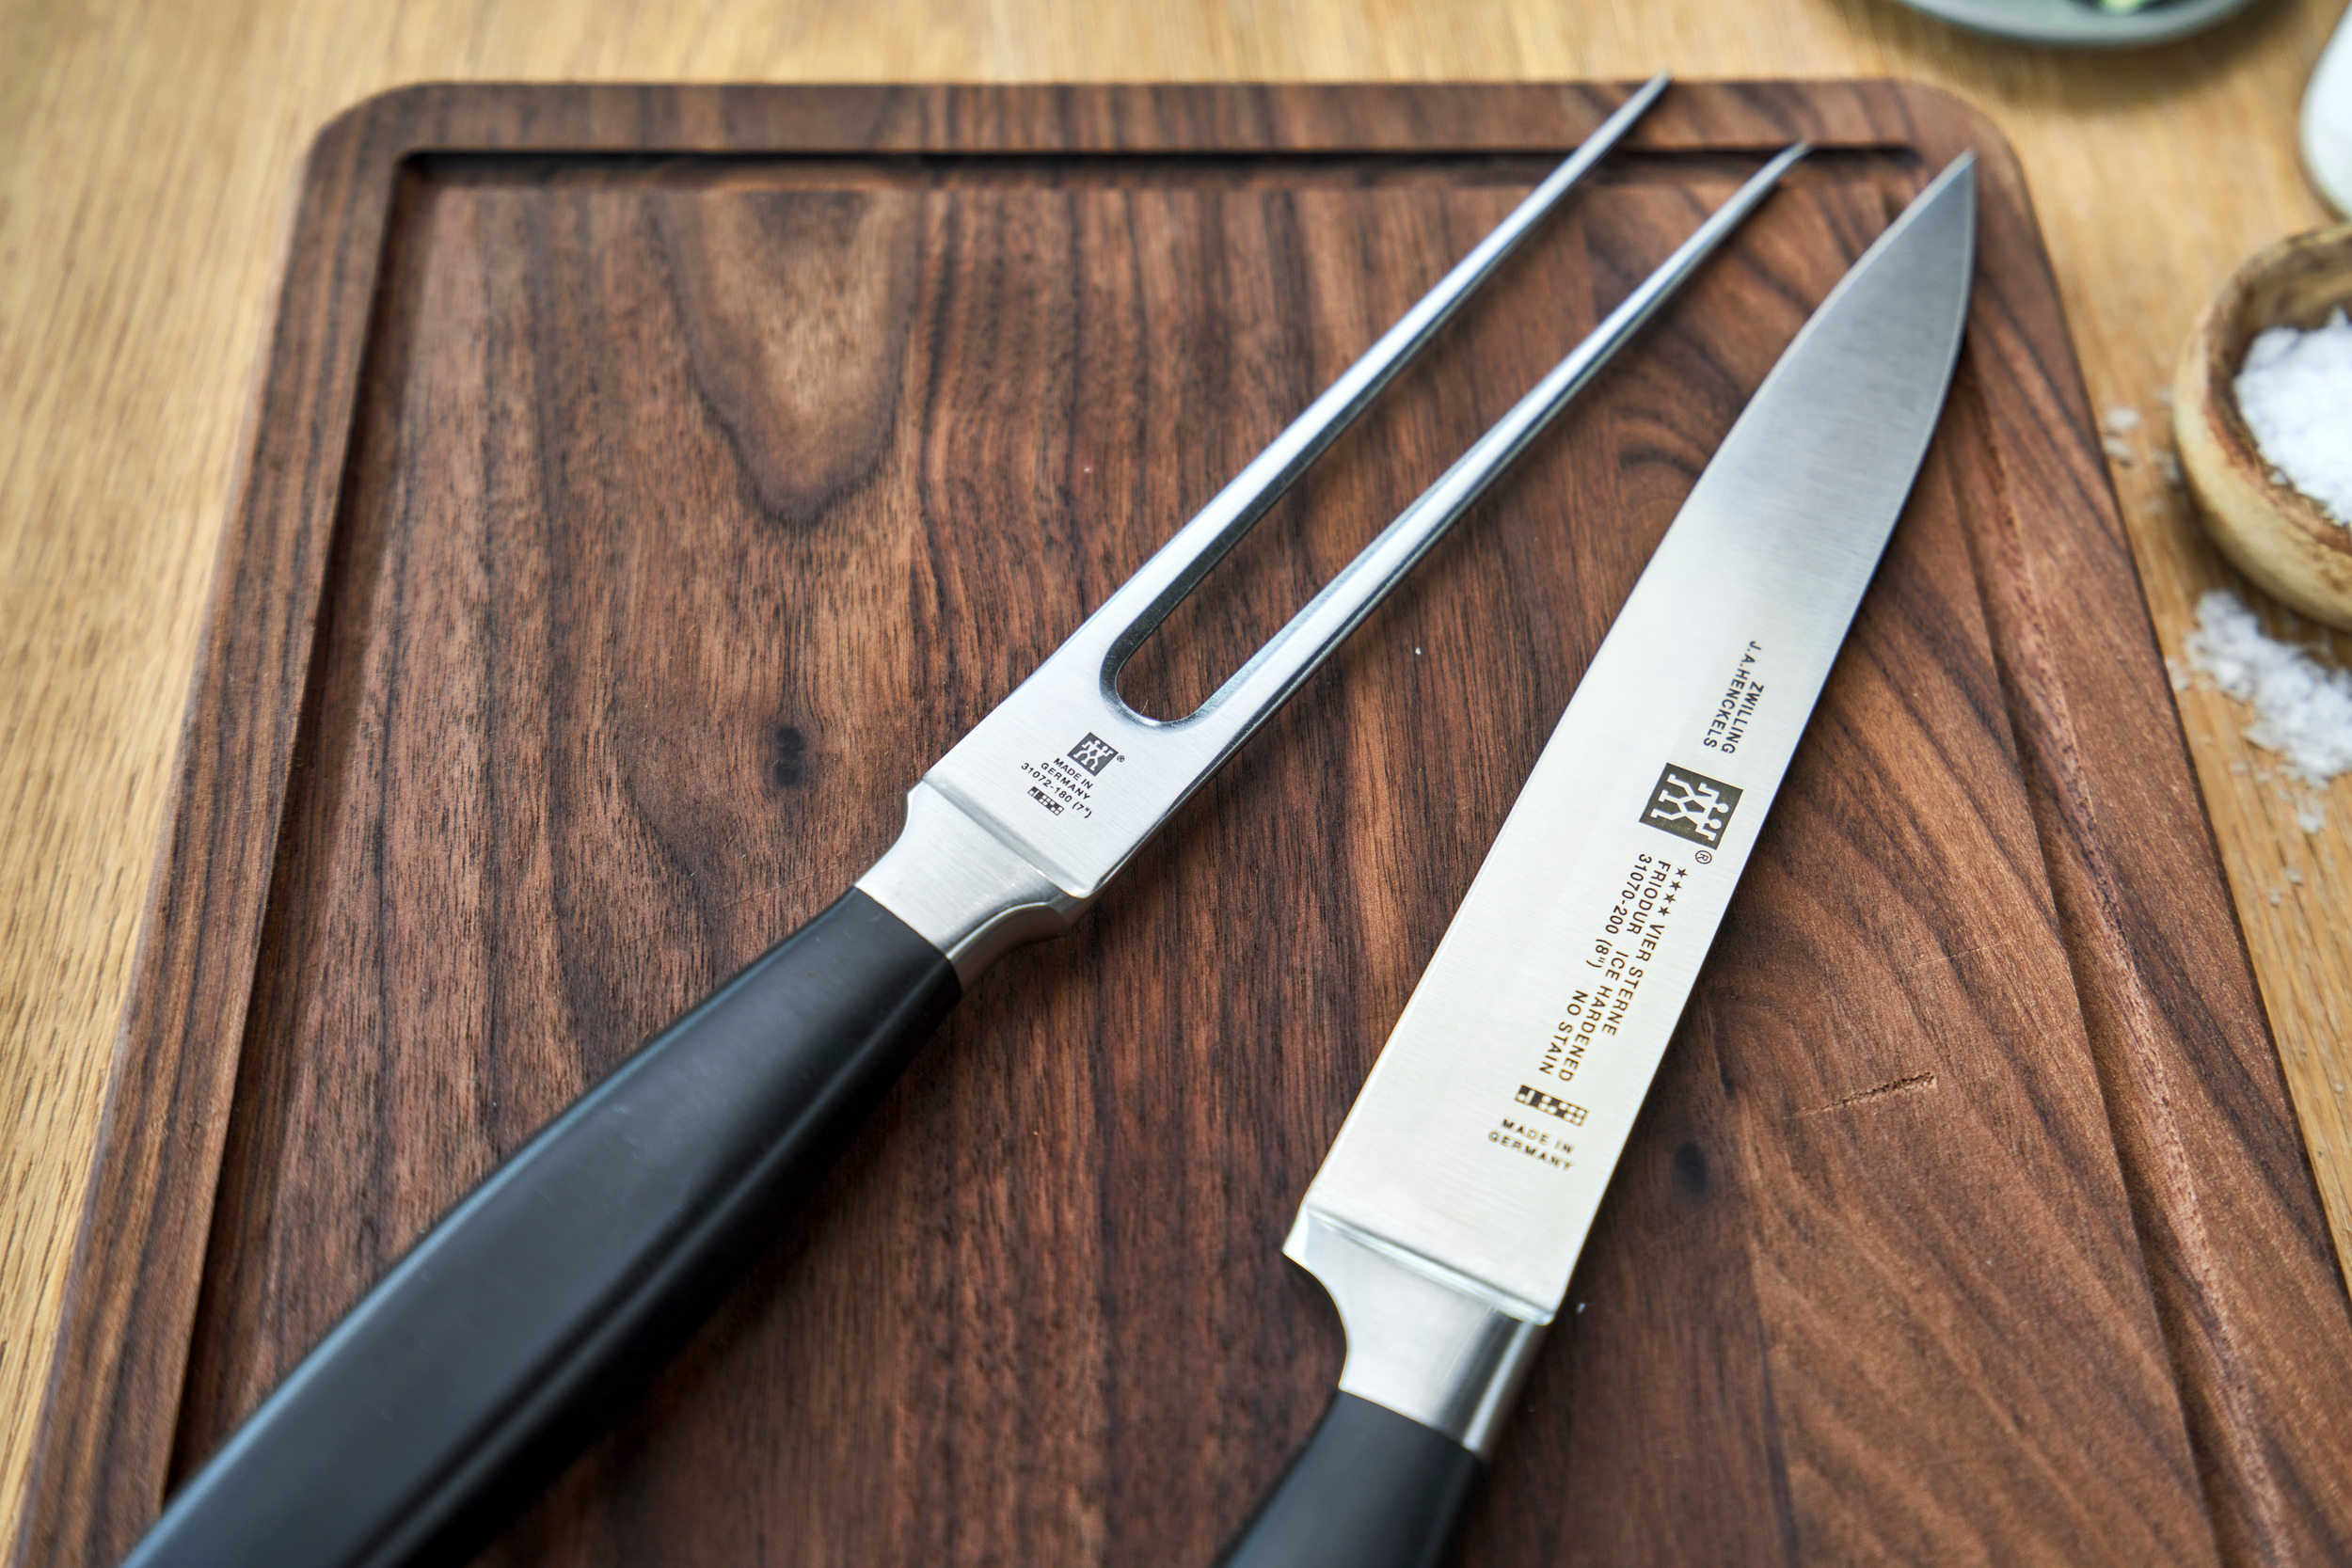 https://3fa-media.com/zwilling/zwilling-four-star-meat-knife-and-meat-fork-2-el__153386_c14a084-s2500x2500.jpg